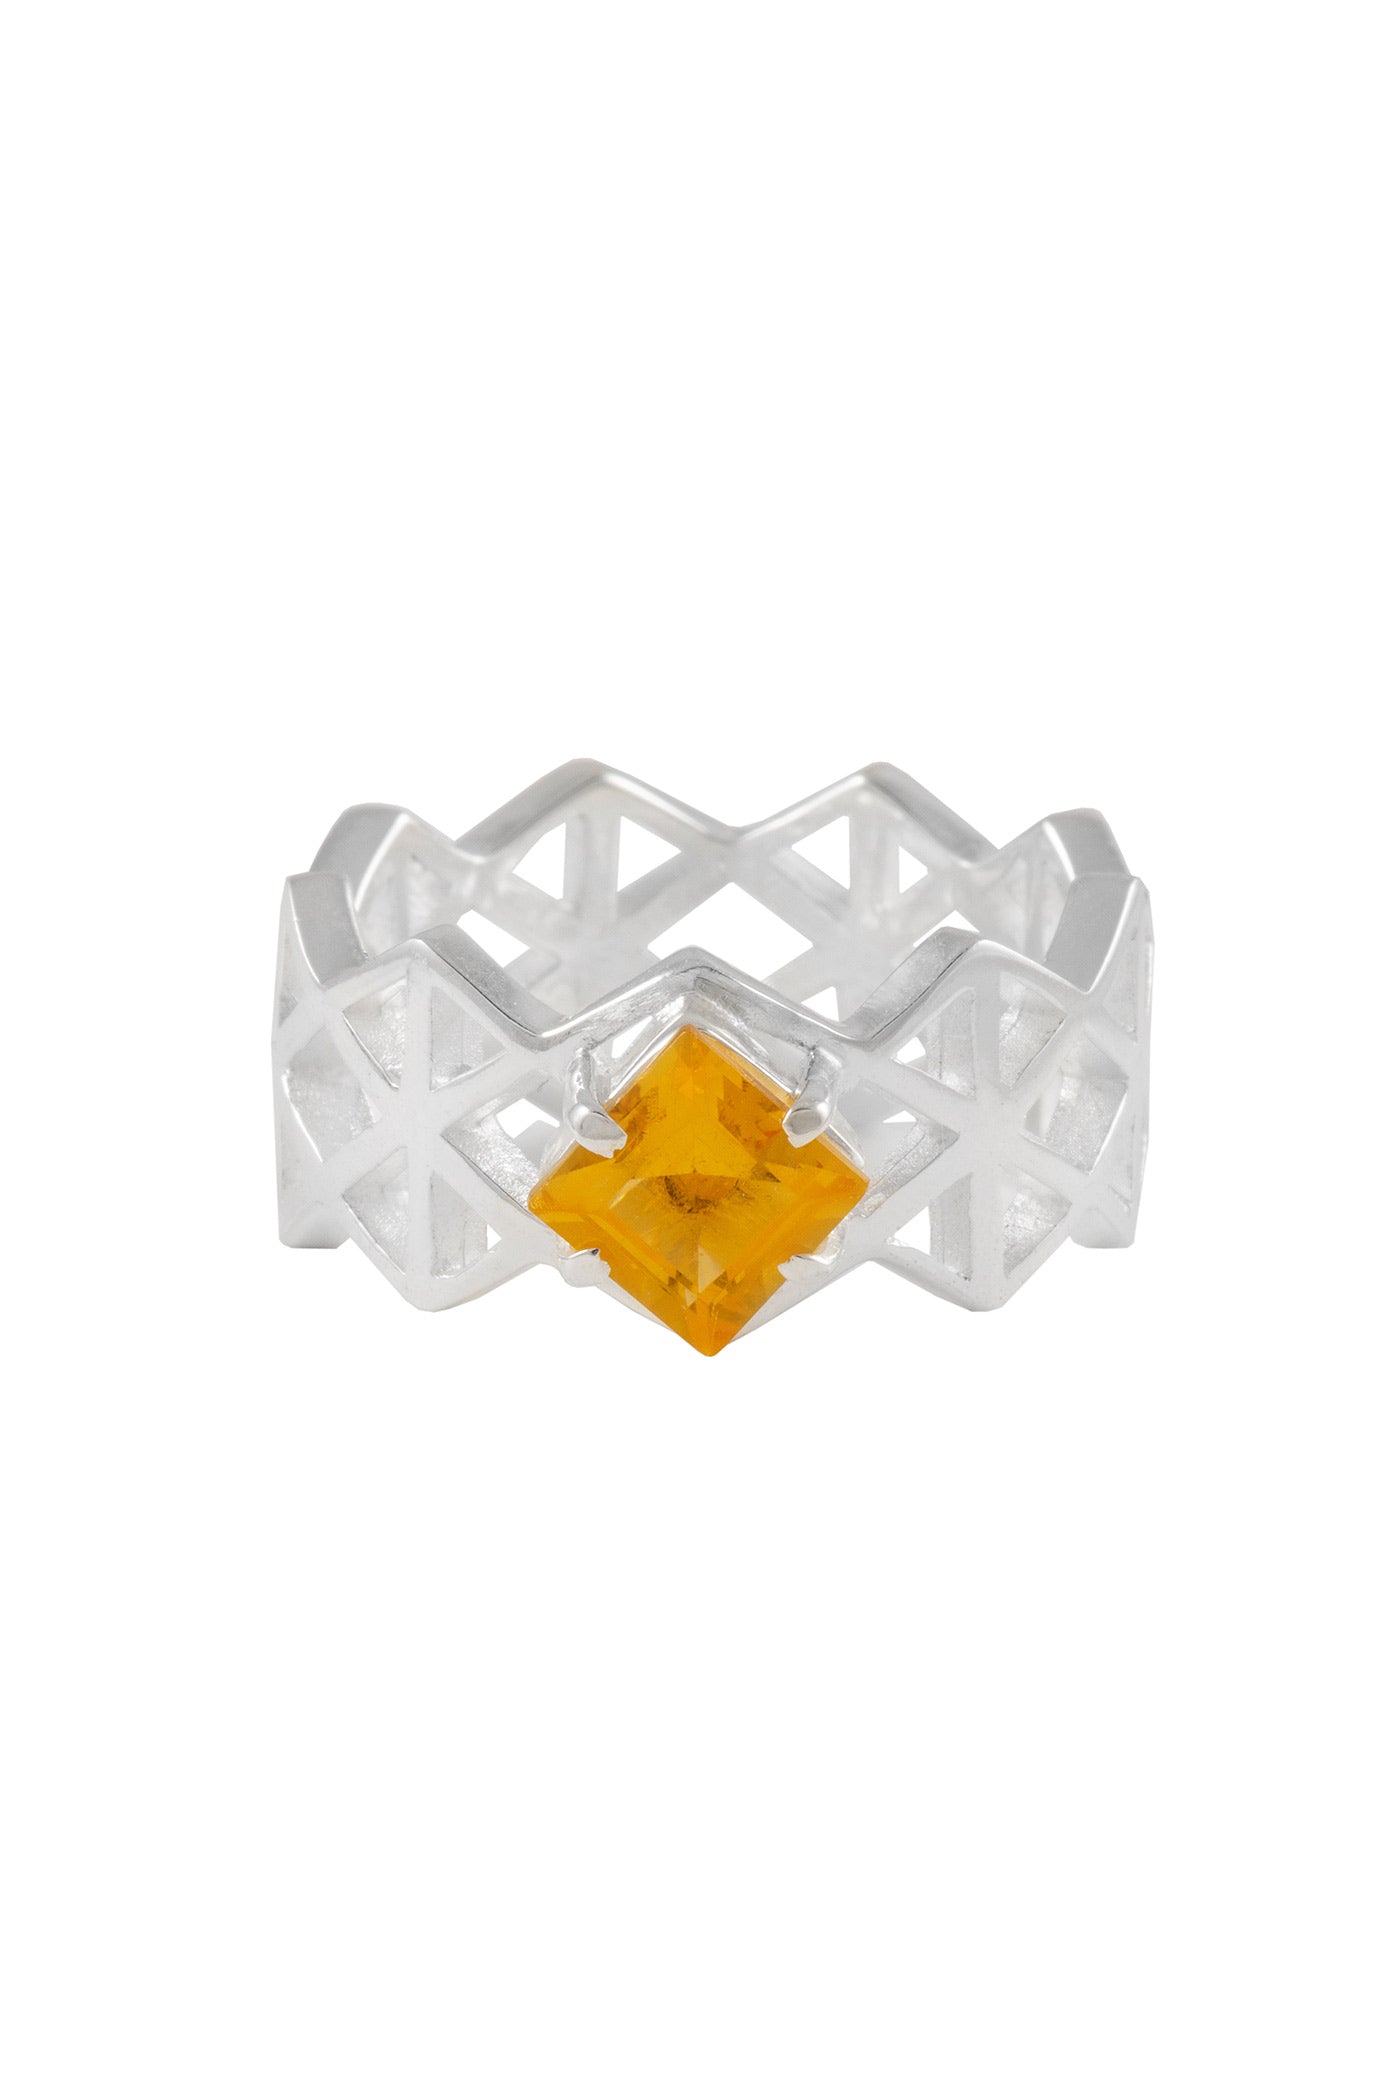 Large life force ring with citrine stone. Silver